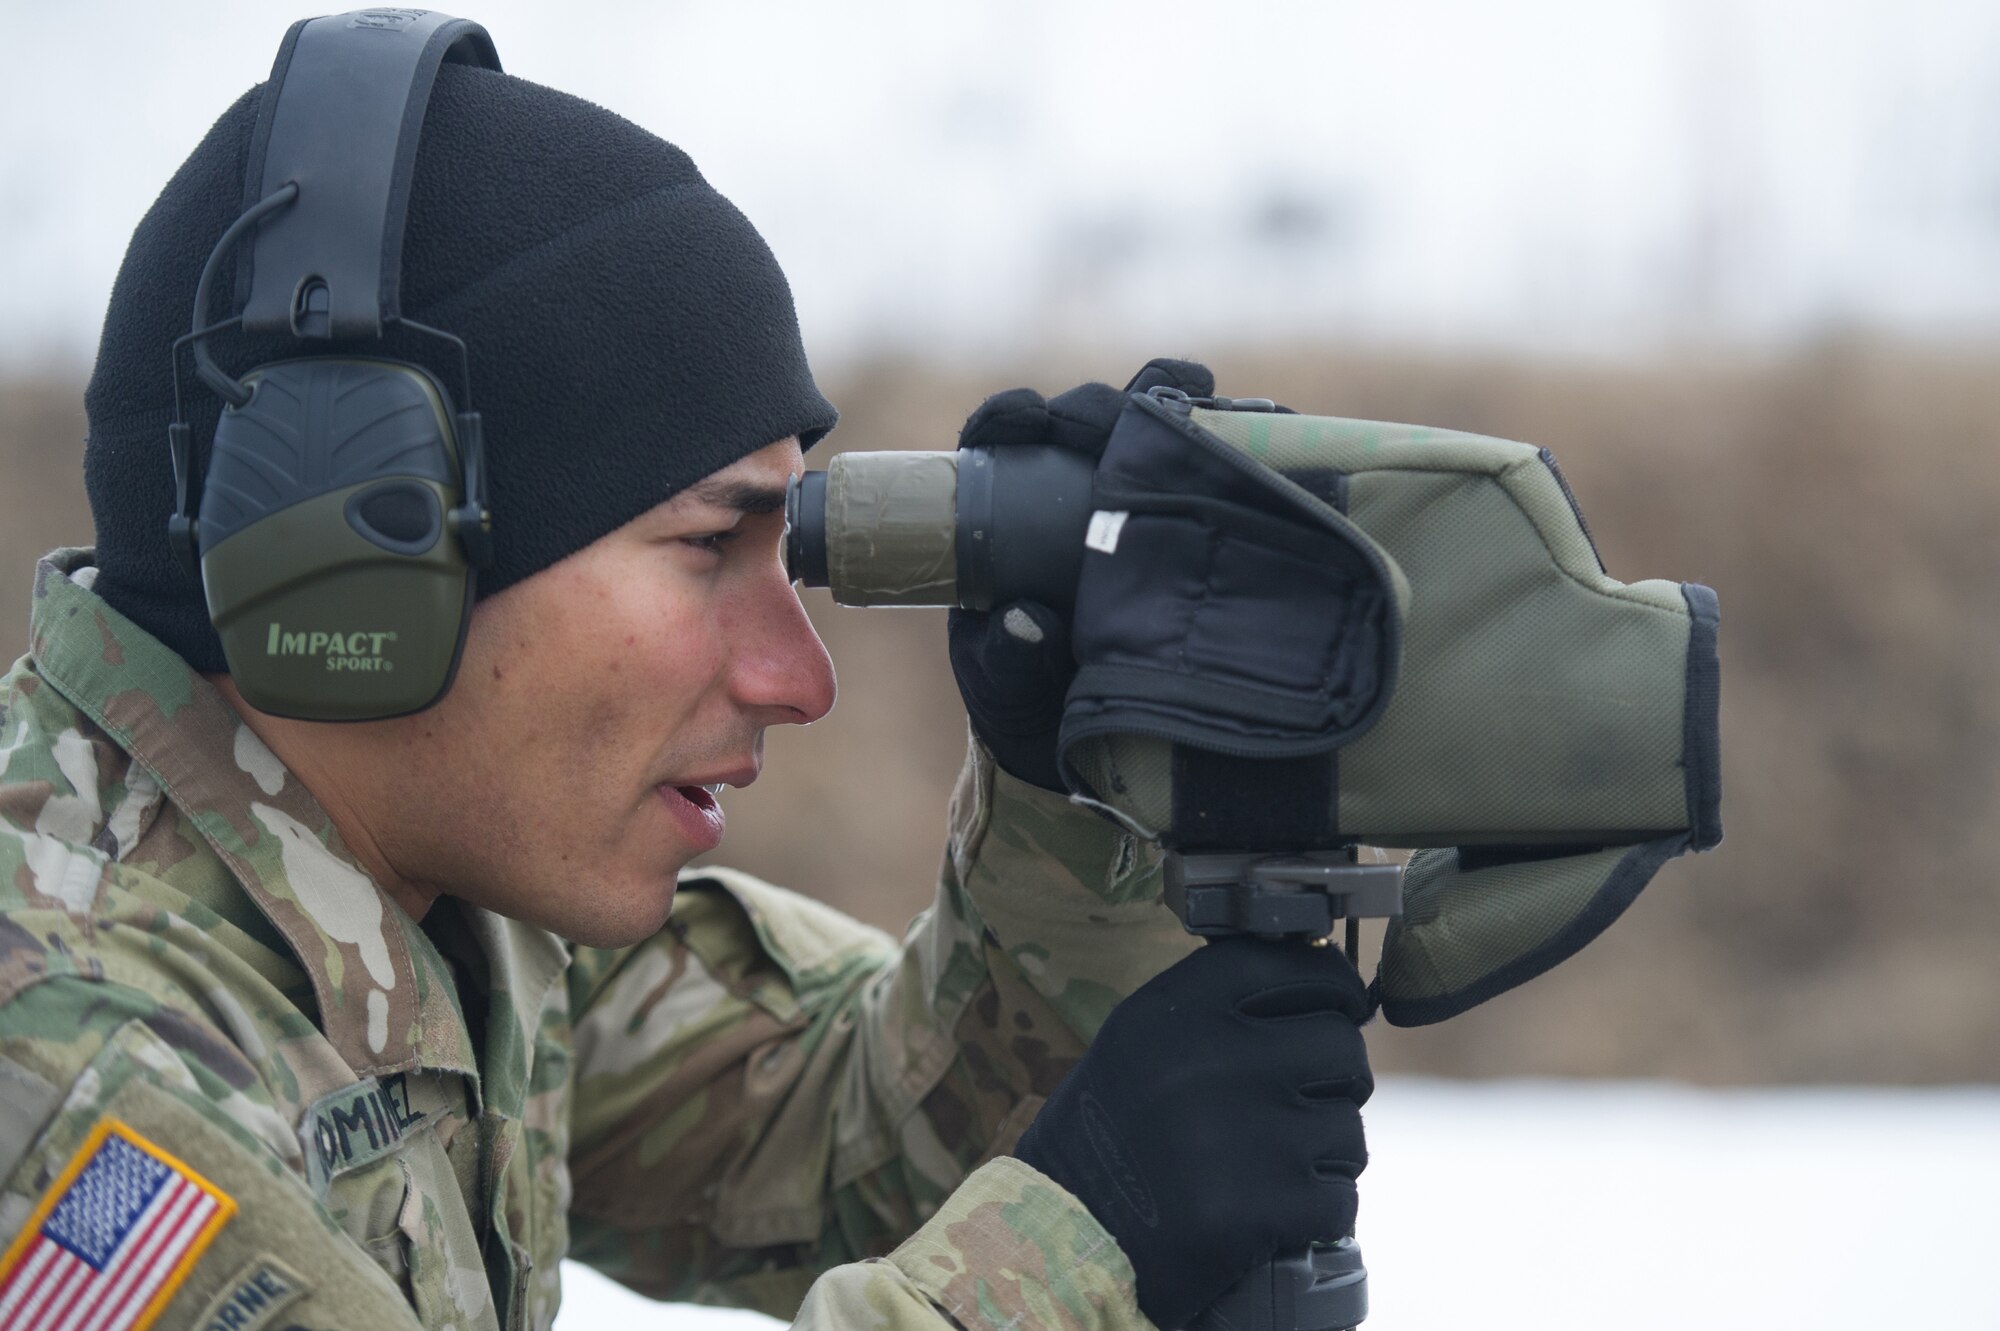 Army Spc. Arturo Dominguez, a native of Okeechobee, Fla., assigned to Charlie Troop, 1st Squadron, 40th Cavalry Regiment (Airborne), 4th Infantry Brigade Combat Team (Airborne), 25th Infantry Division, U.S. Army Alaska, uses a spotting scope to observe a fellow soldier’s accuracy with a M2010 Enhanced Sniper Rifle on Statler range at Joint Base Elmendorf-Richardson, Alaska, April 6, 2018, during marksmanship training.  A sniper's main responsibility is to deliver discriminatory, highly accurate rifle fire against enemy targets that cannot be engaged successfully by the regular rifleman due to range, size, location, fleeting nature, or visibility.